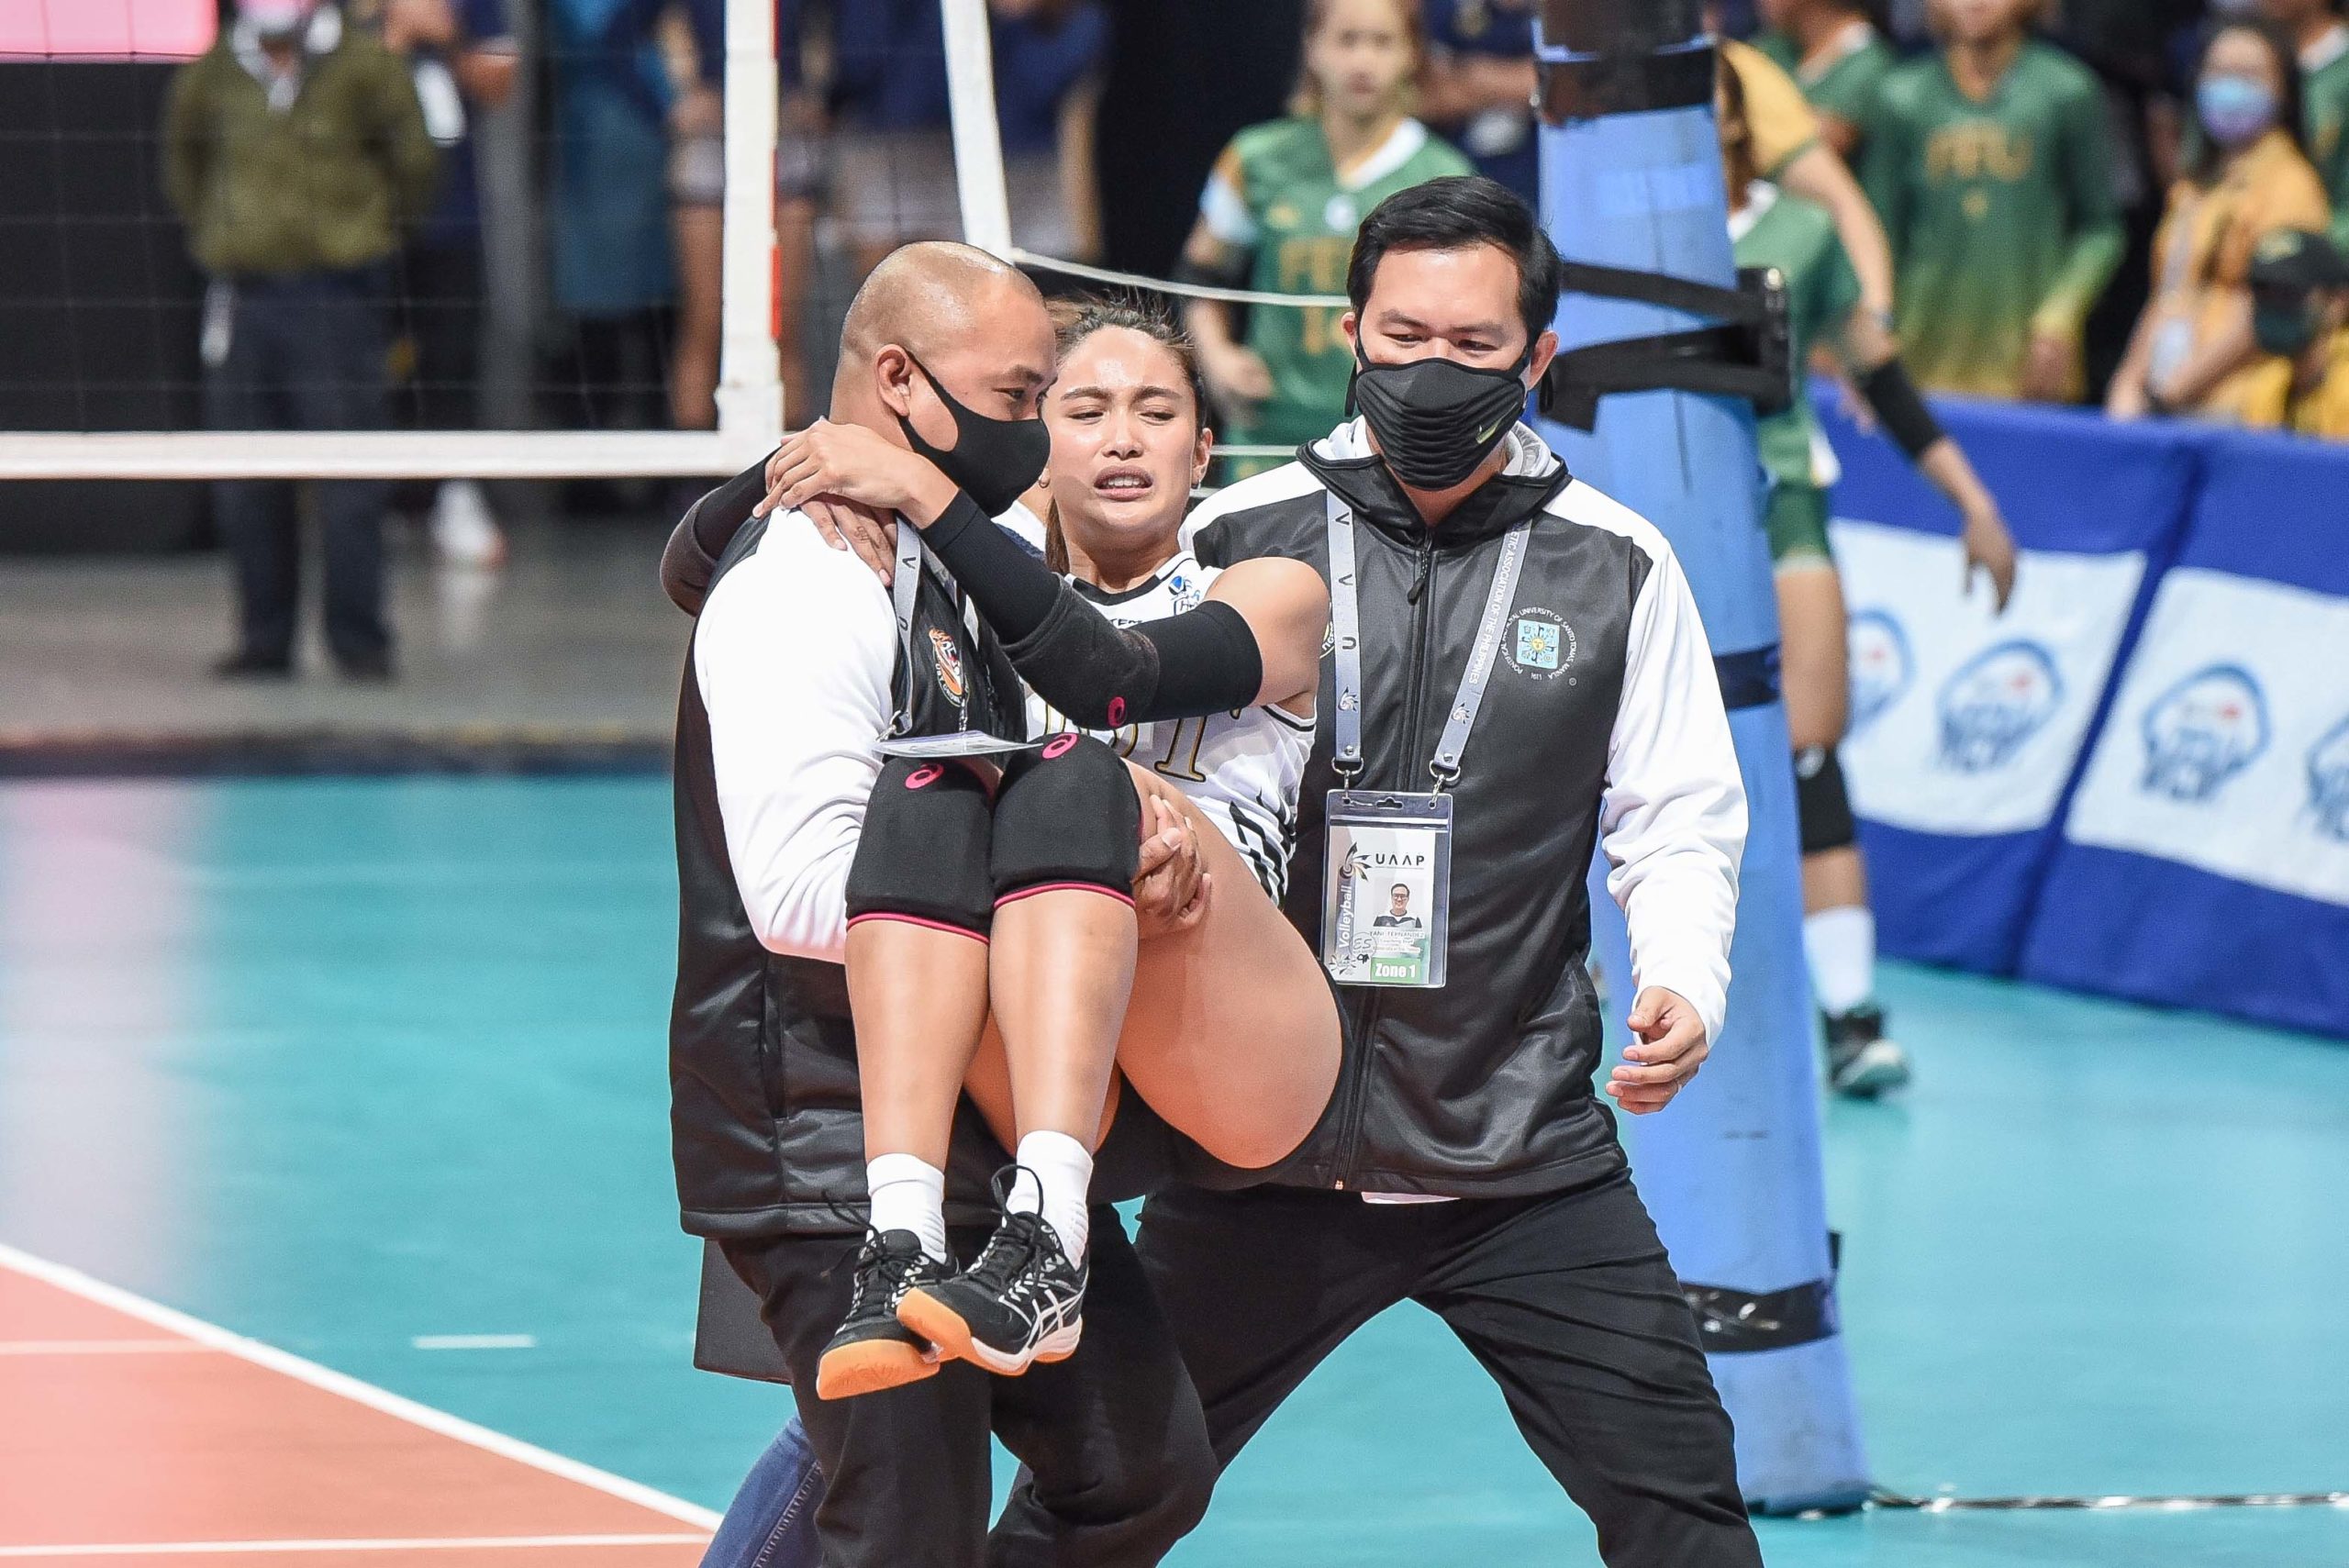 Imee Hernandez being carried by UST coach KungFu  Reyes after injuring ankle. UAAP PHOTO